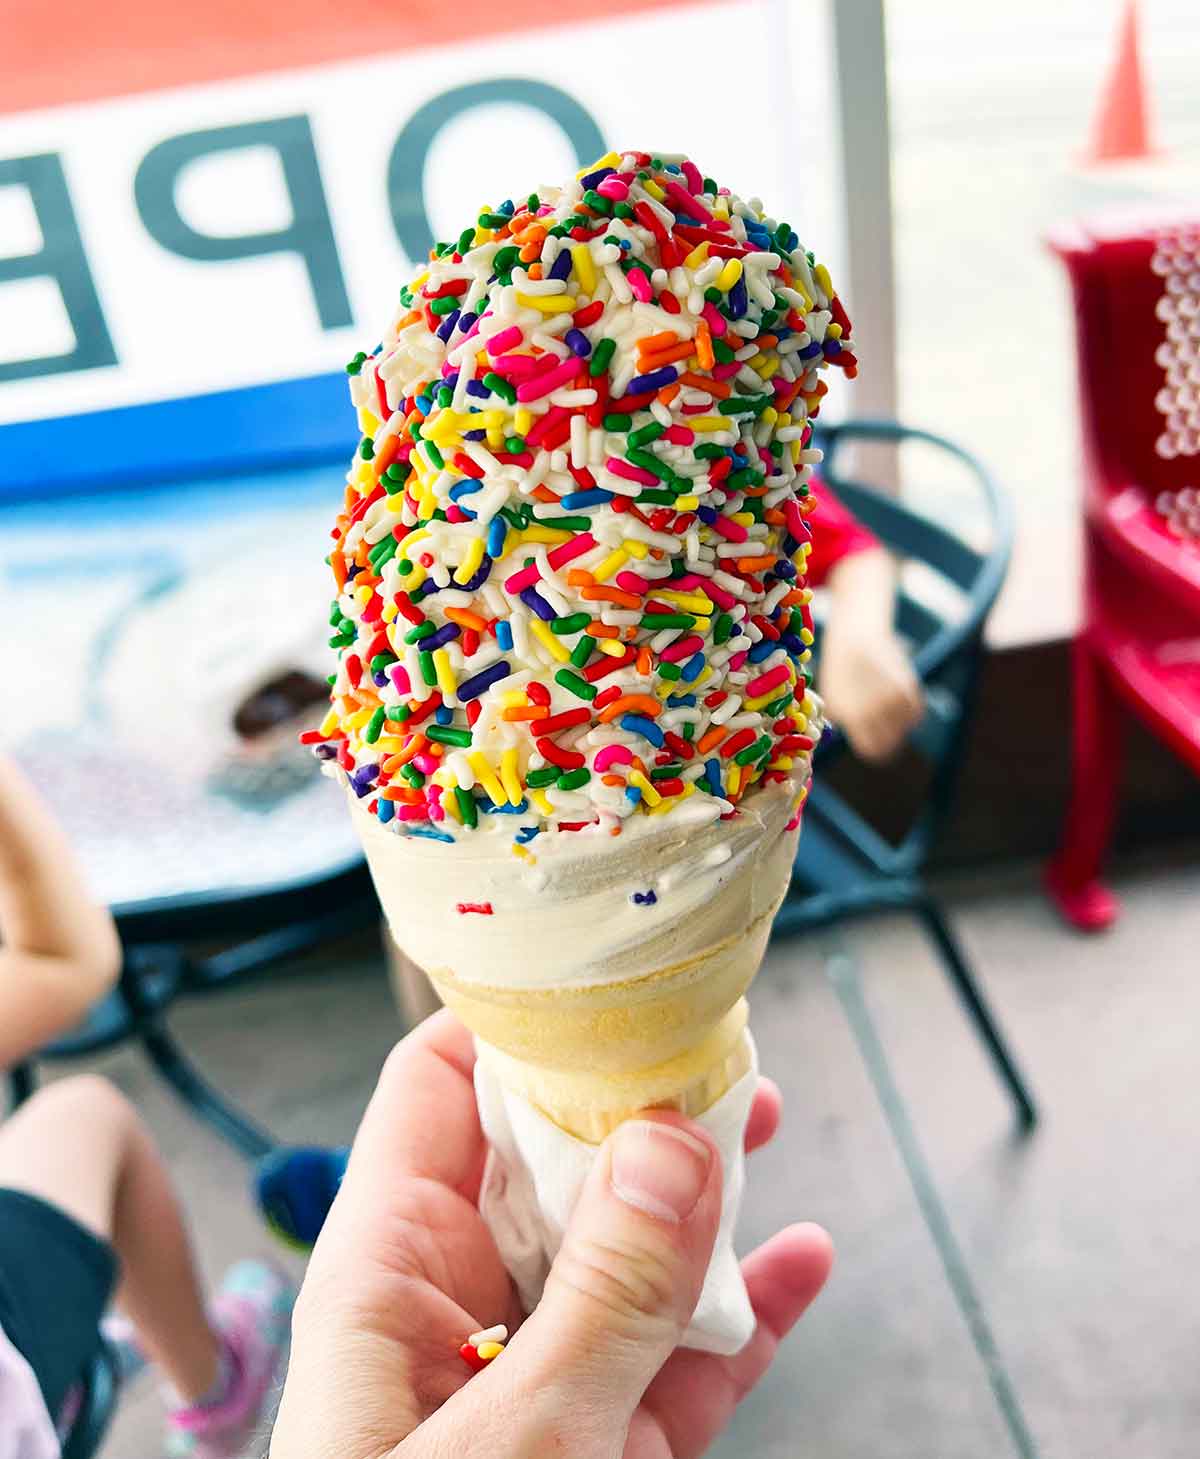 Hand holding a soft serve ice cream cone with rainbow sprinkles.